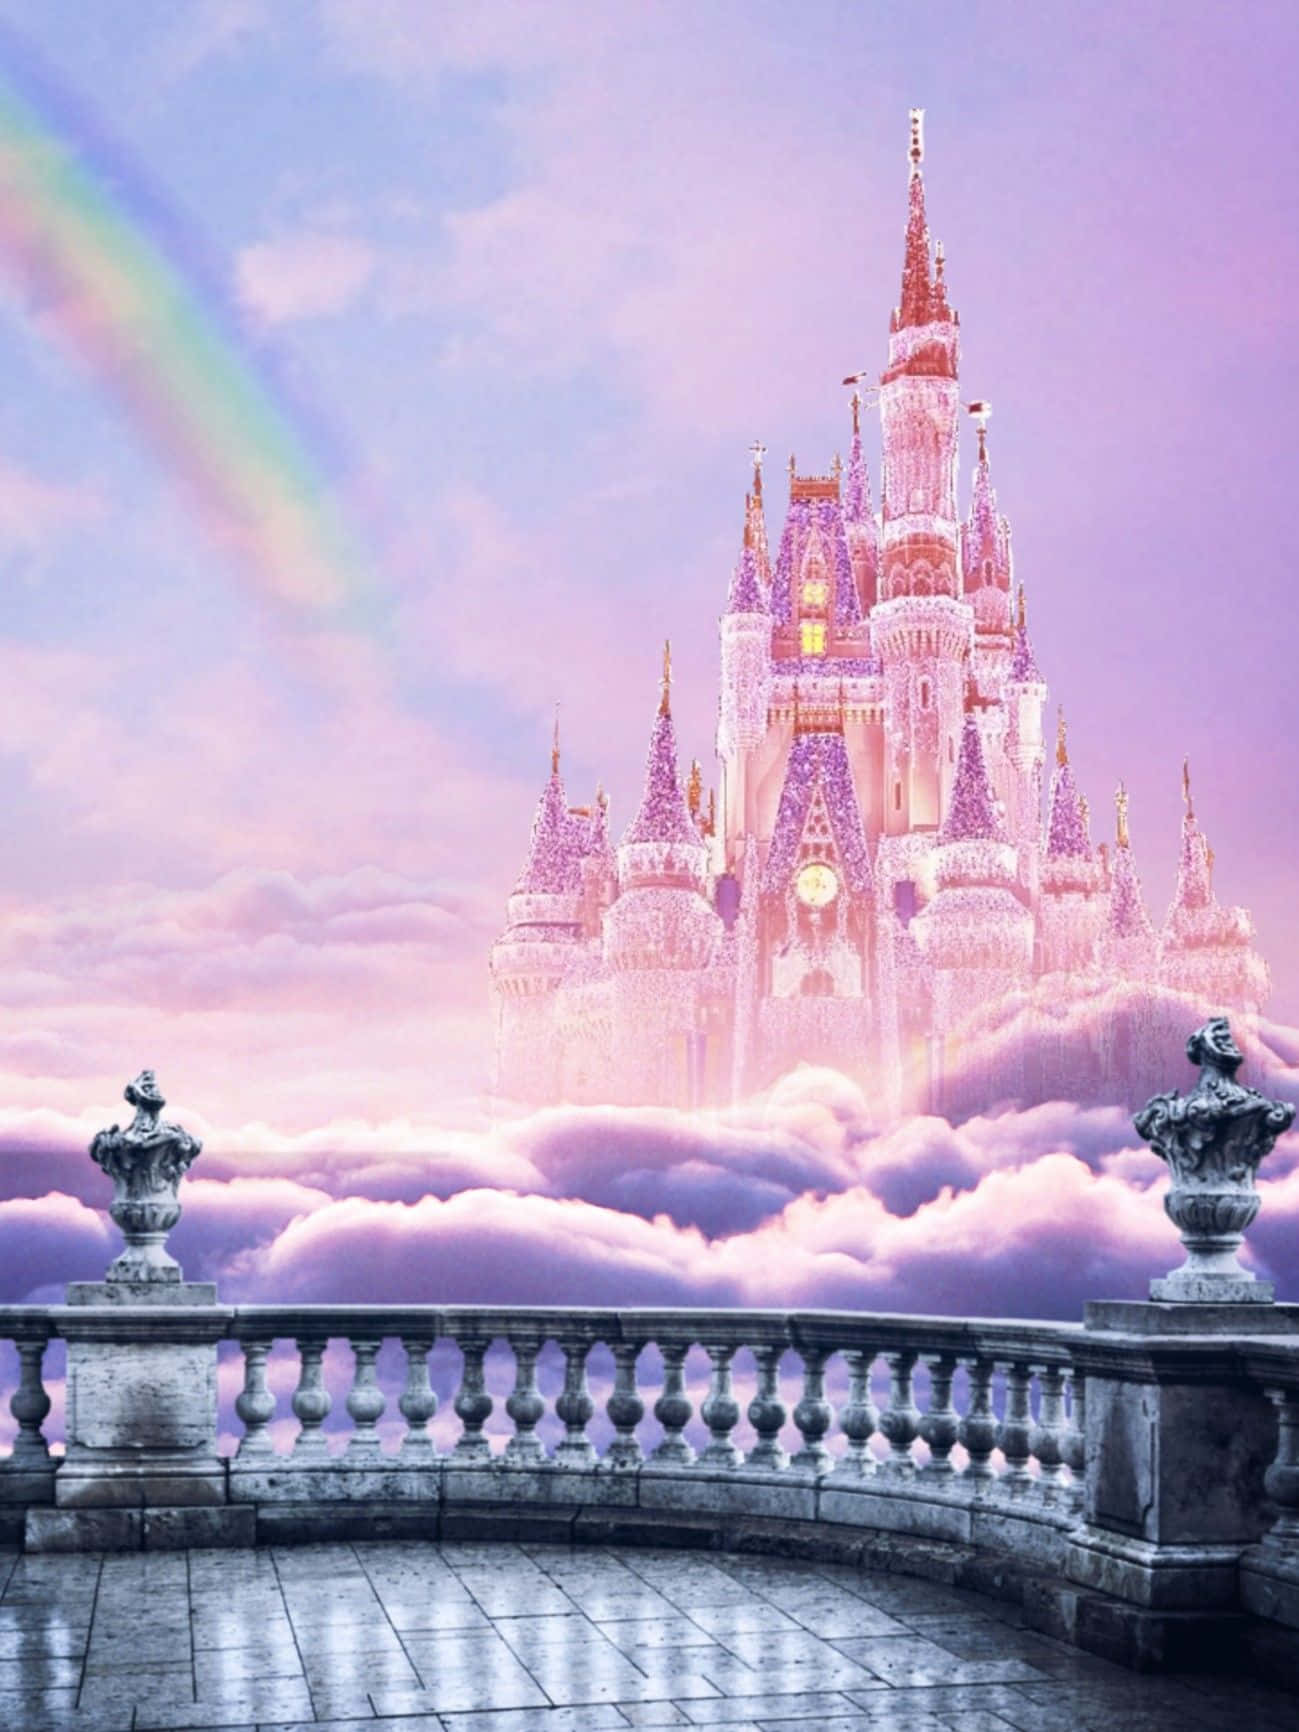 "Experience The Magic Of Disney Castle"